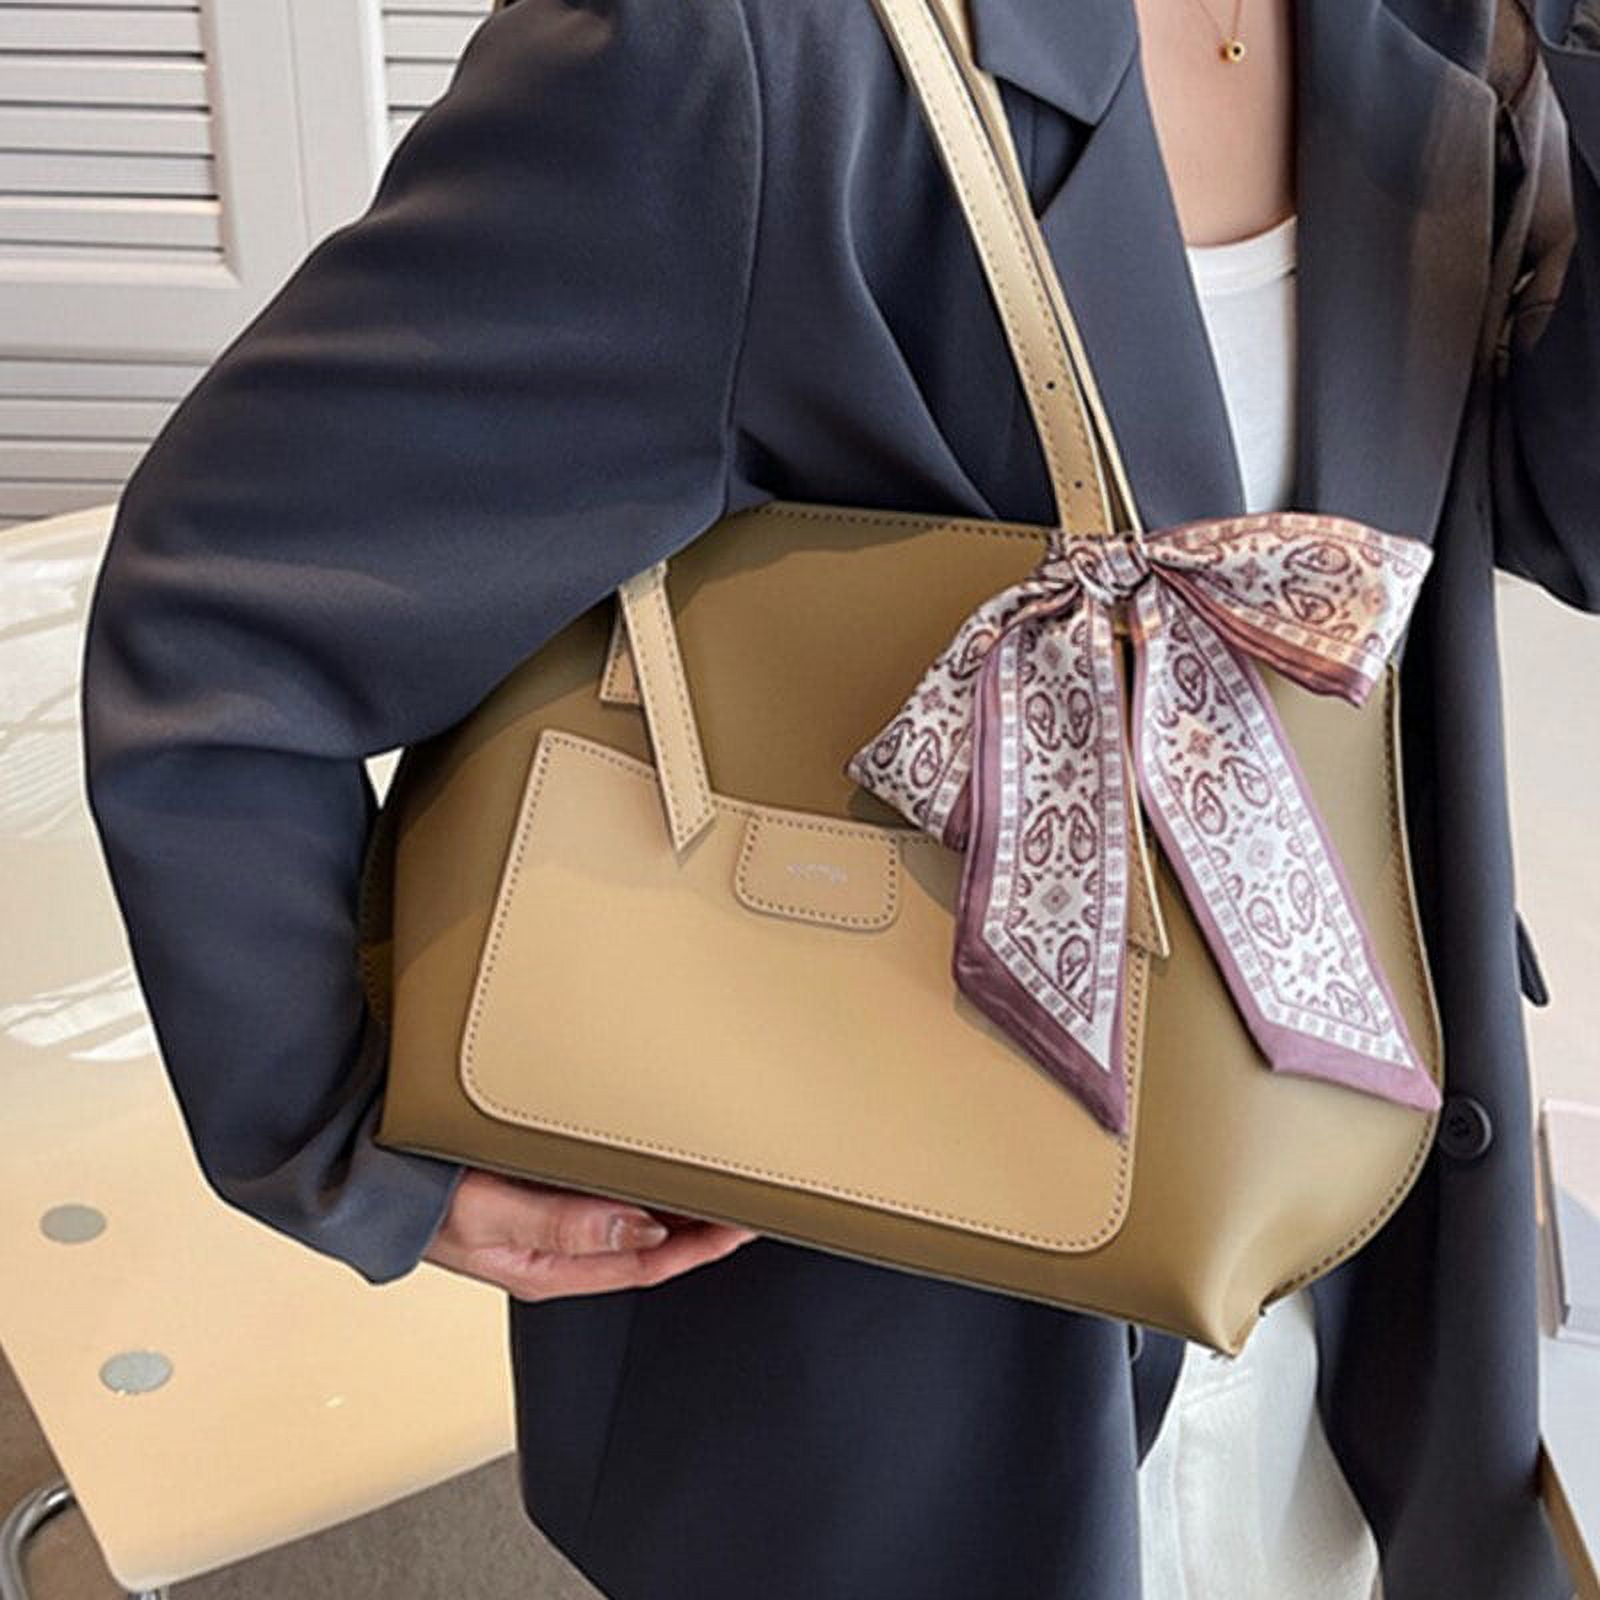 CoCopeaunts fashion silk scarf women bag Large capacity casual tote bags  high quality handbag womens leather shoulder bag bolso mujer 